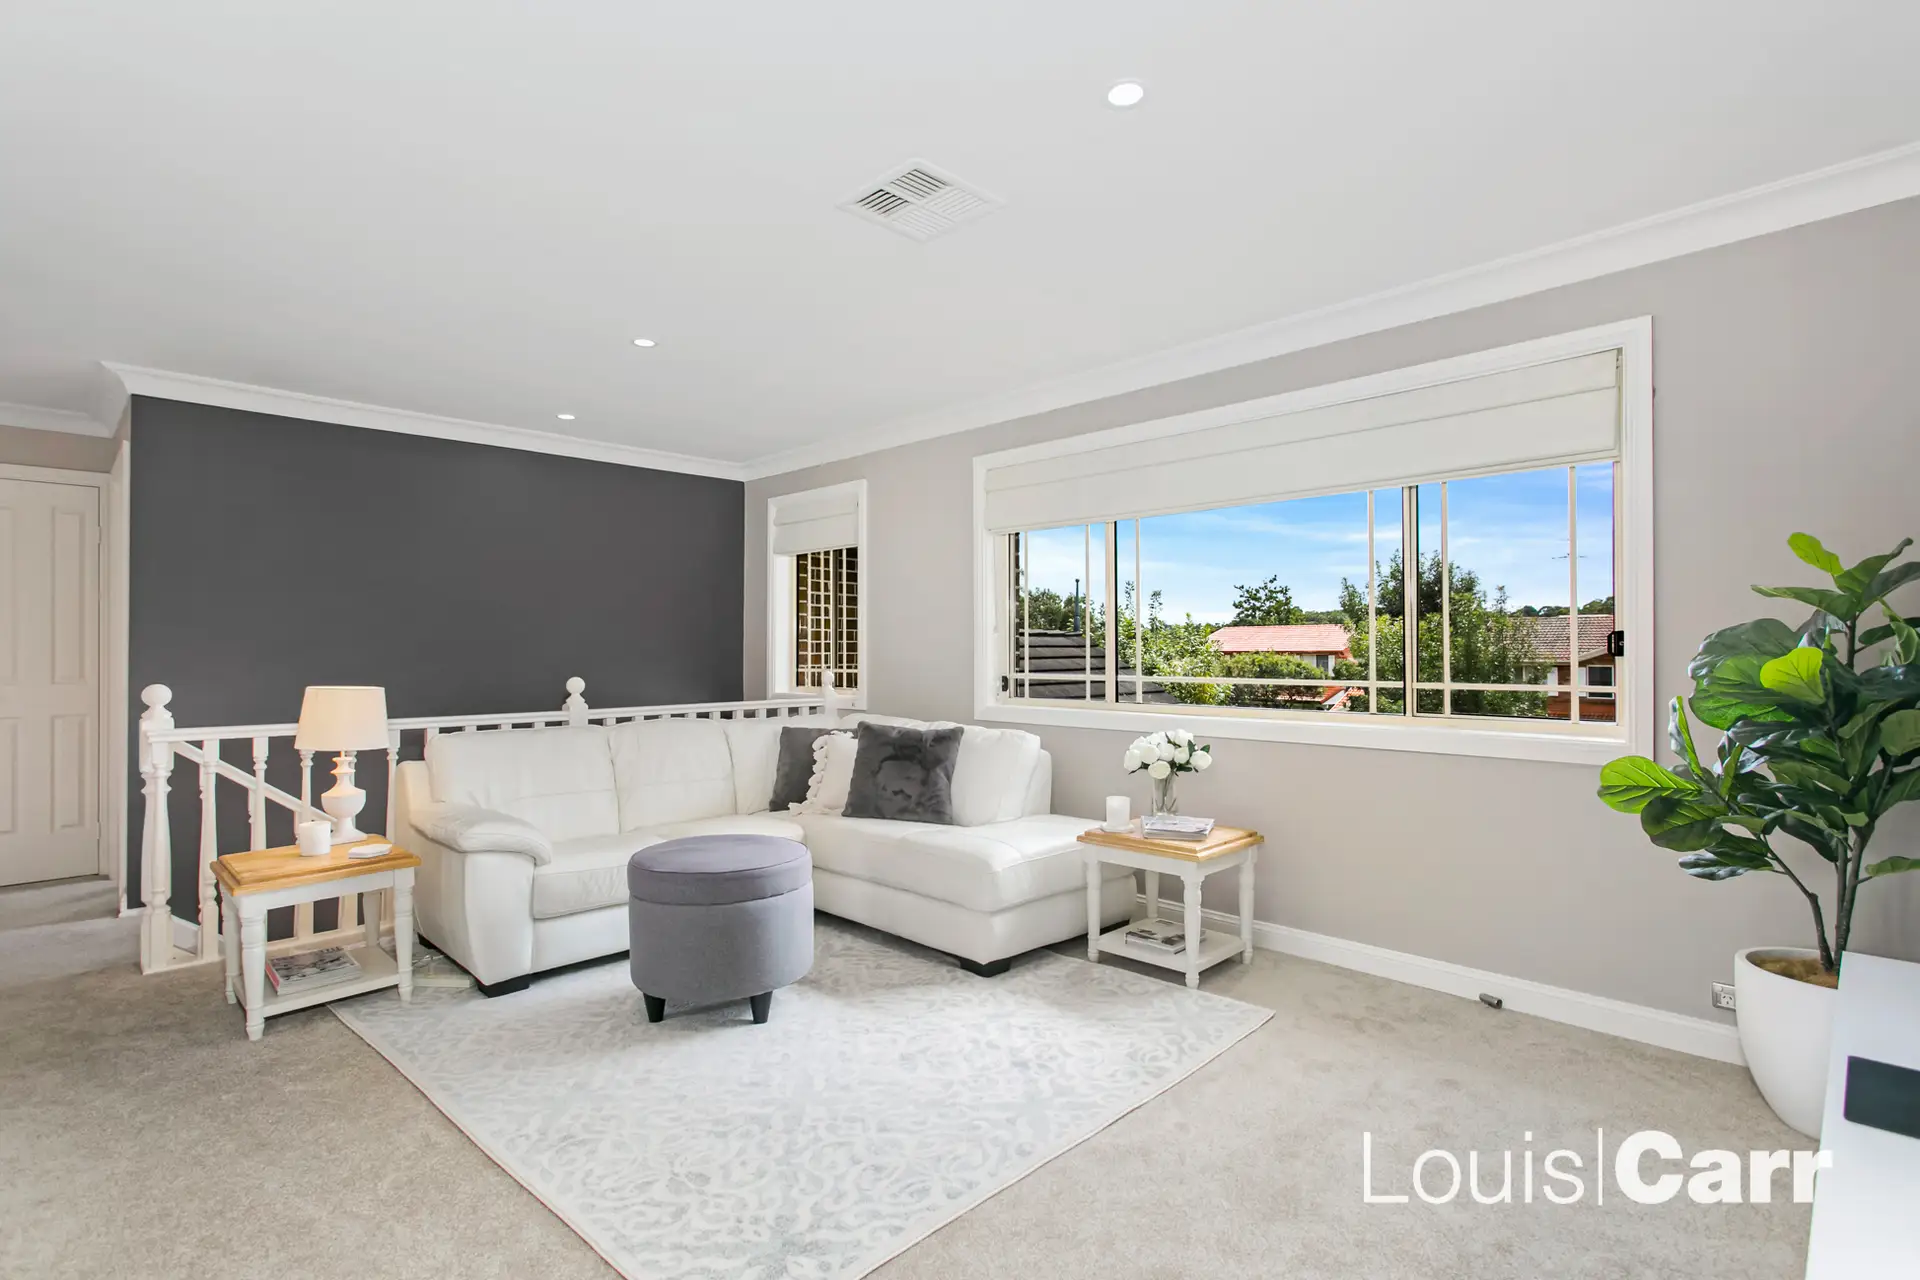 Photo #12: 9 Teddick Place, Cherrybrook - Sold by Louis Carr Real Estate